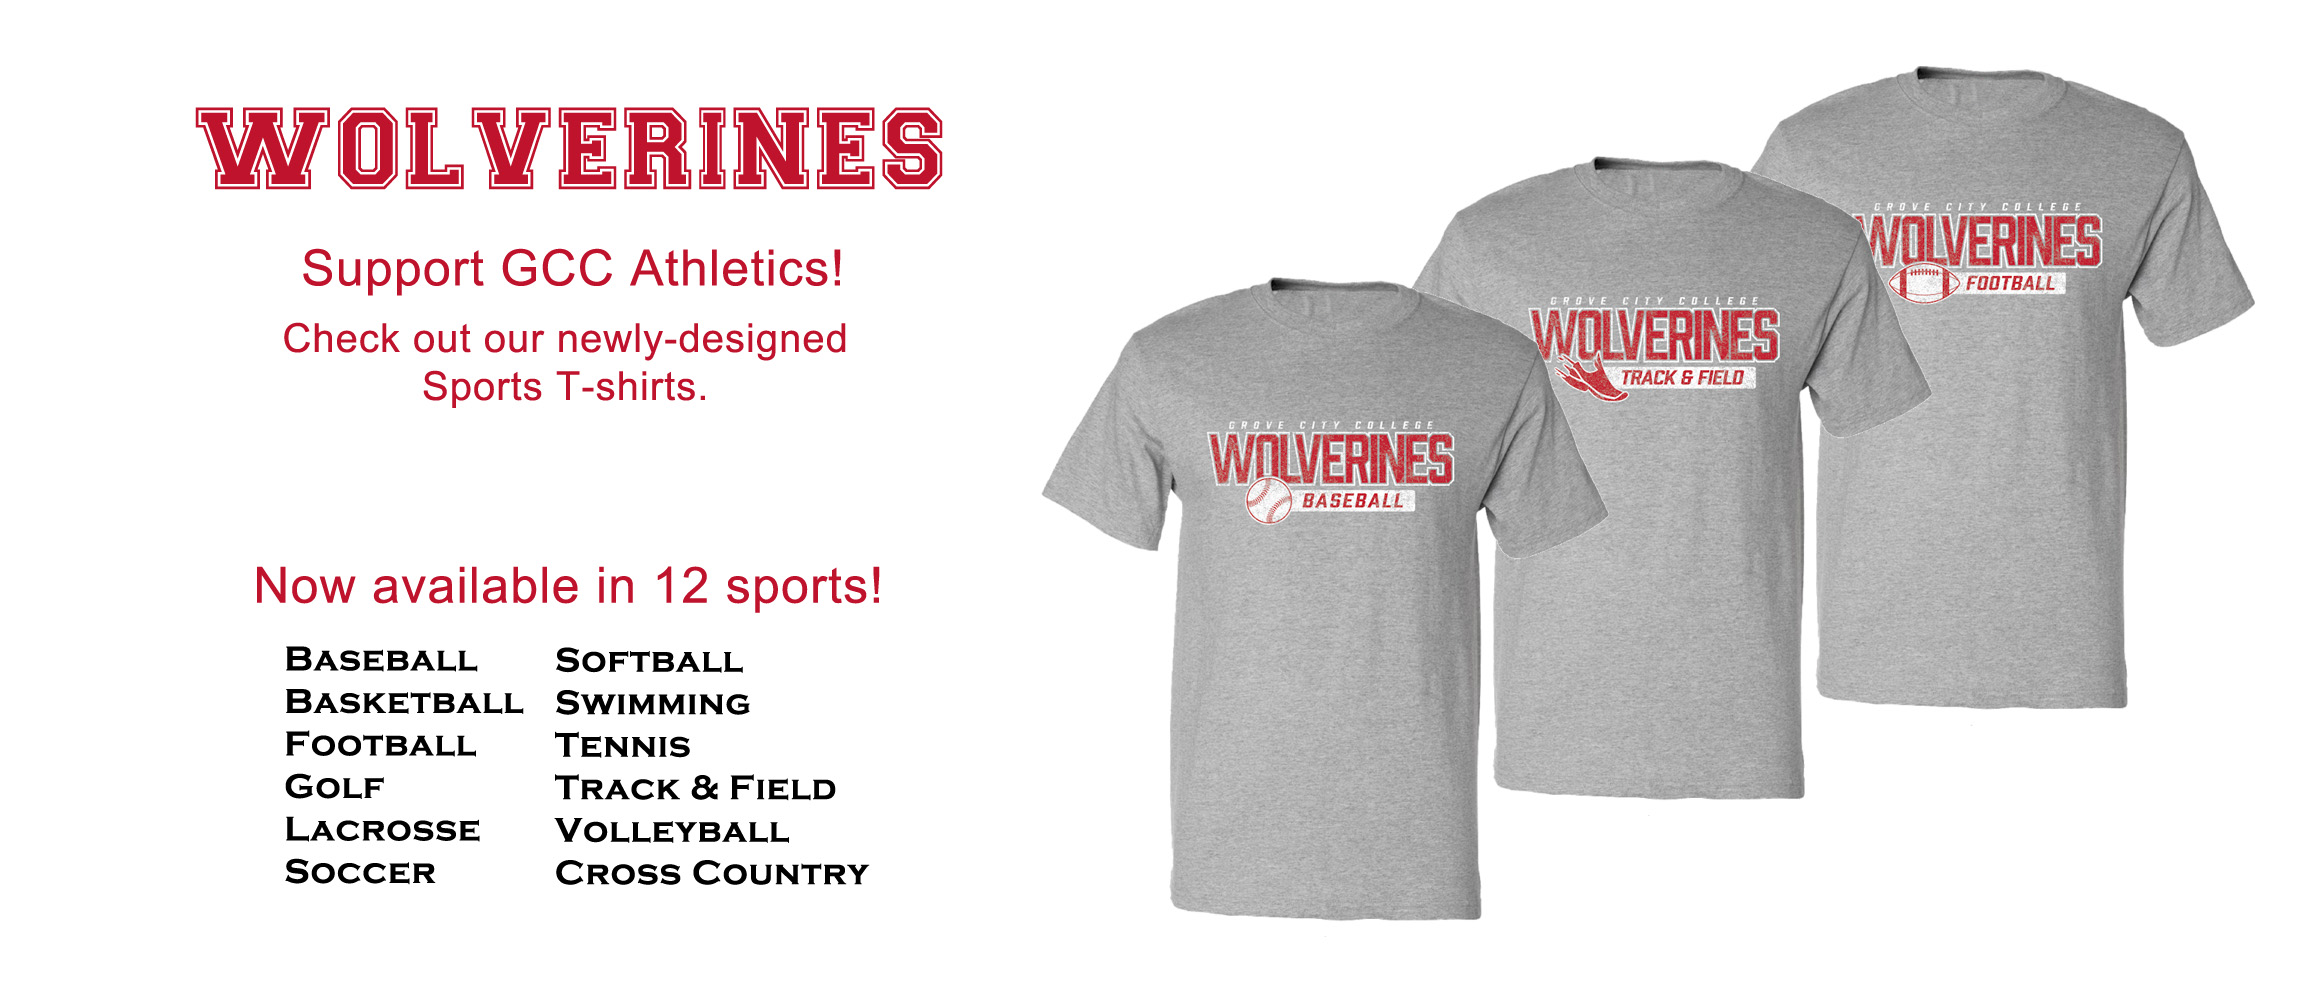 Support GCC Athletics.  Check out our newly designed Sports T-Shirts